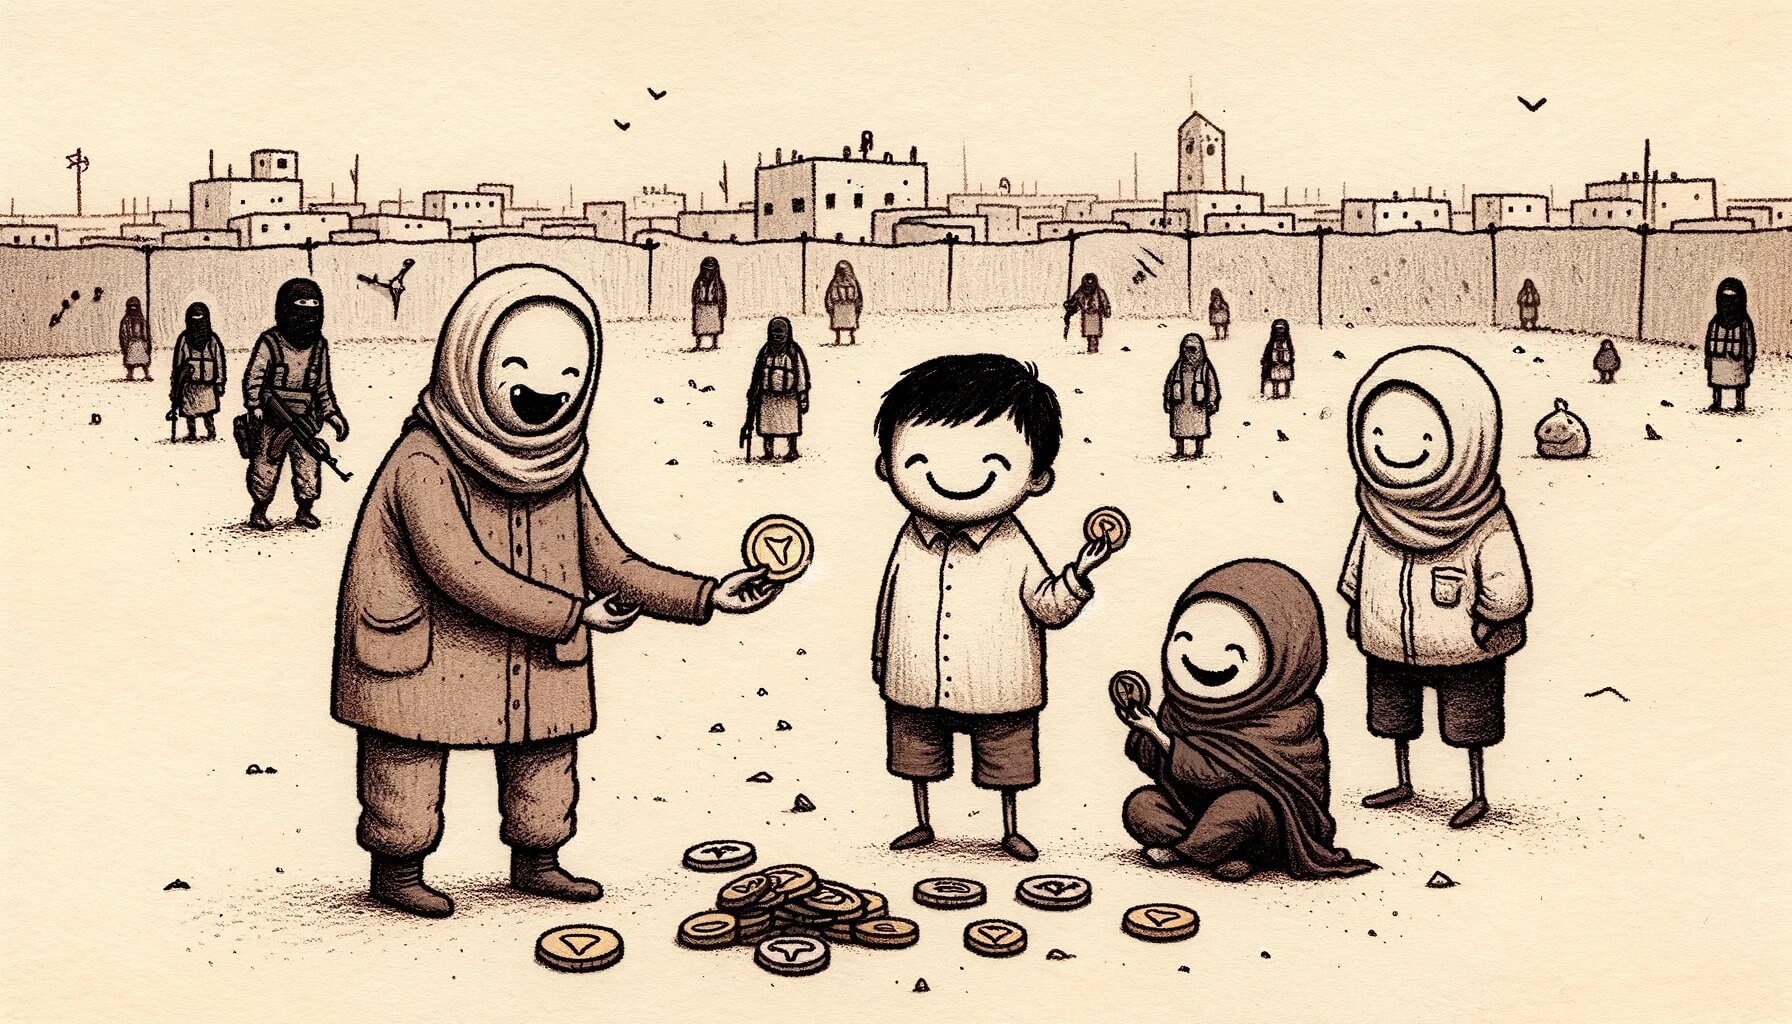 A detailed, monochromatic illustration shows a scene in a conflict-affected area with simple buildings and a few armed individuals in the background. In the foreground, several children and a woman wearing headscarves are depicted smiling and holding coins with the $ZKL token symbol. The children are playing with a pile of these tokens on the ground. This image represents the incentive mechanism of zkSafeZones, where $ZKL tokens are used to reward the submission of verified geolocation proofs, encouraging active participation and the collection of legal evidence to keep the system engaged and effective.